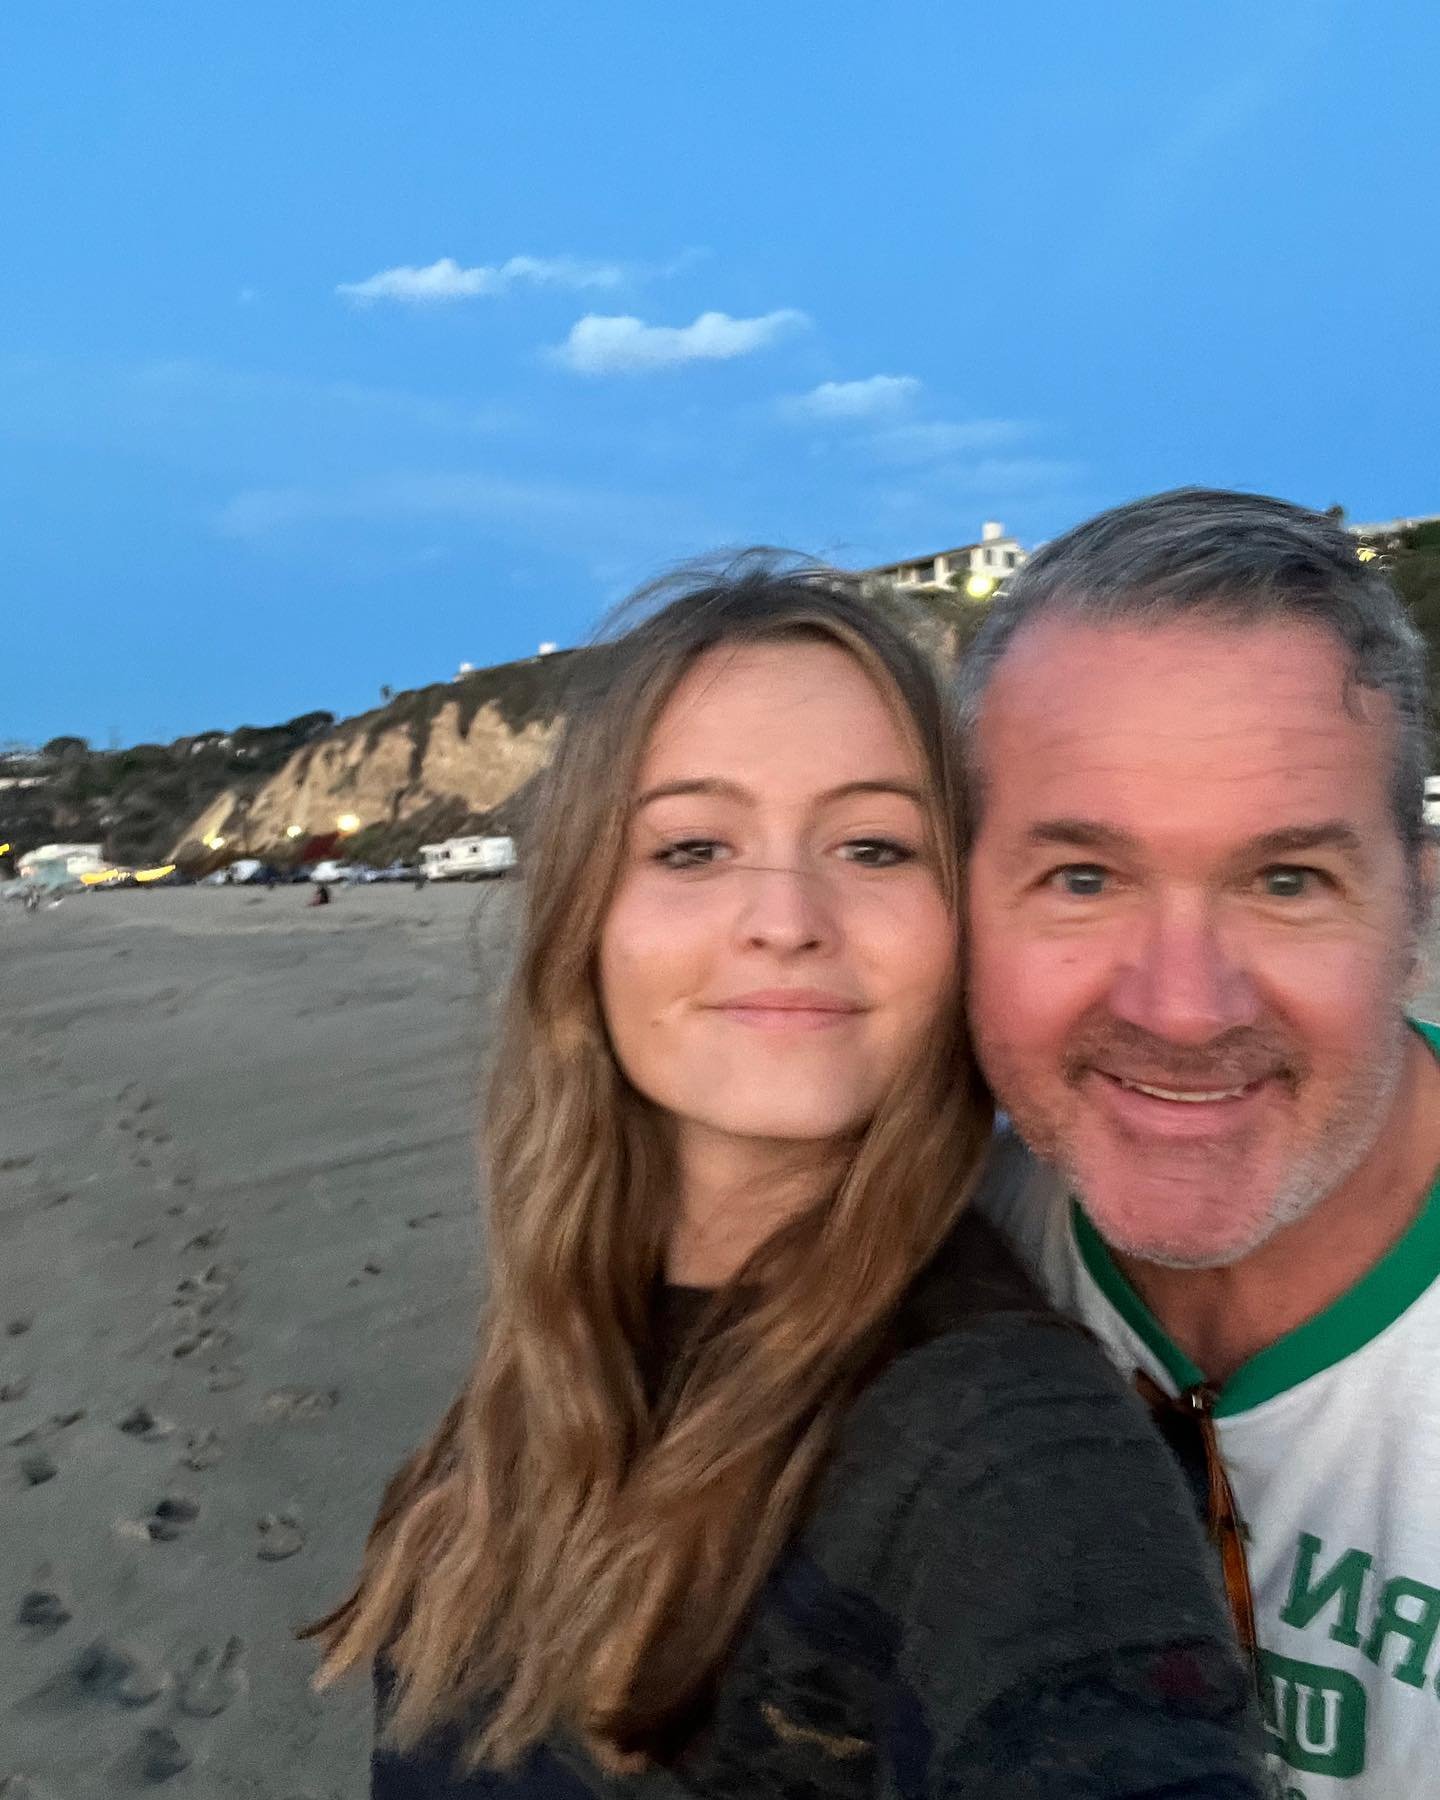 Had a great visit with my daughter Sydney, who is on her second year at Pepperdine. Miss her already. Back to Portland now! @sydney_packman